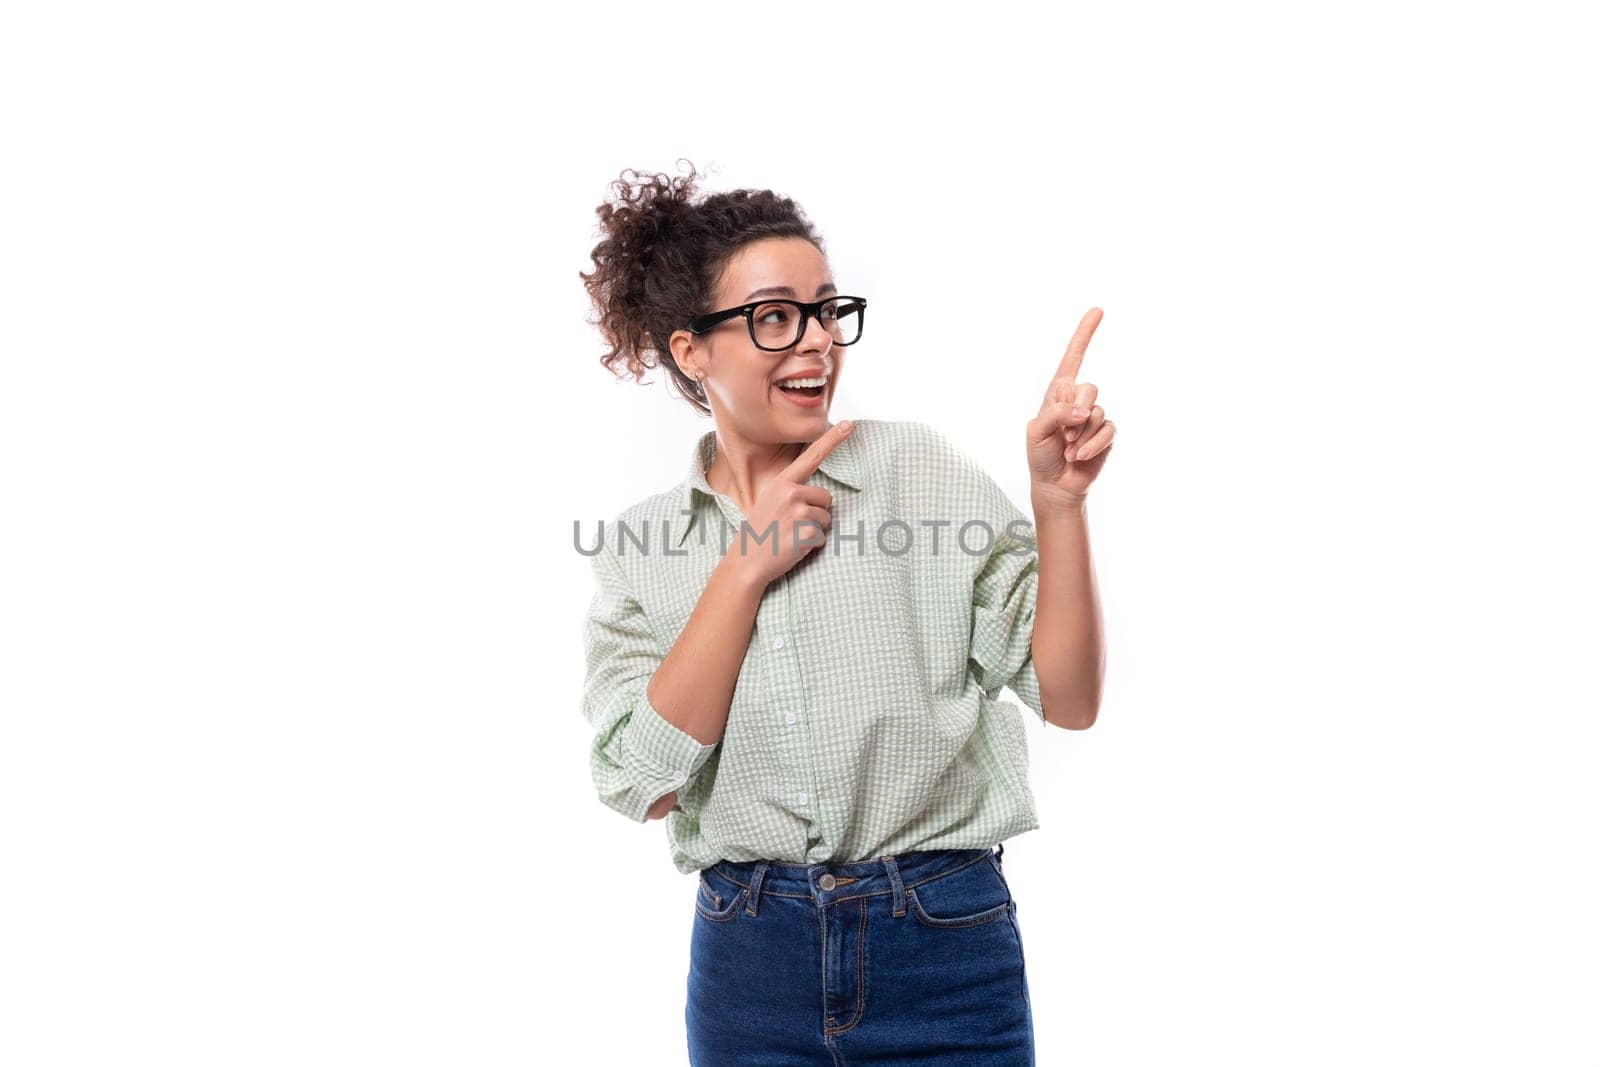 young energetic positive teacher woman with curly black hair dressed in a shirt and jeans.